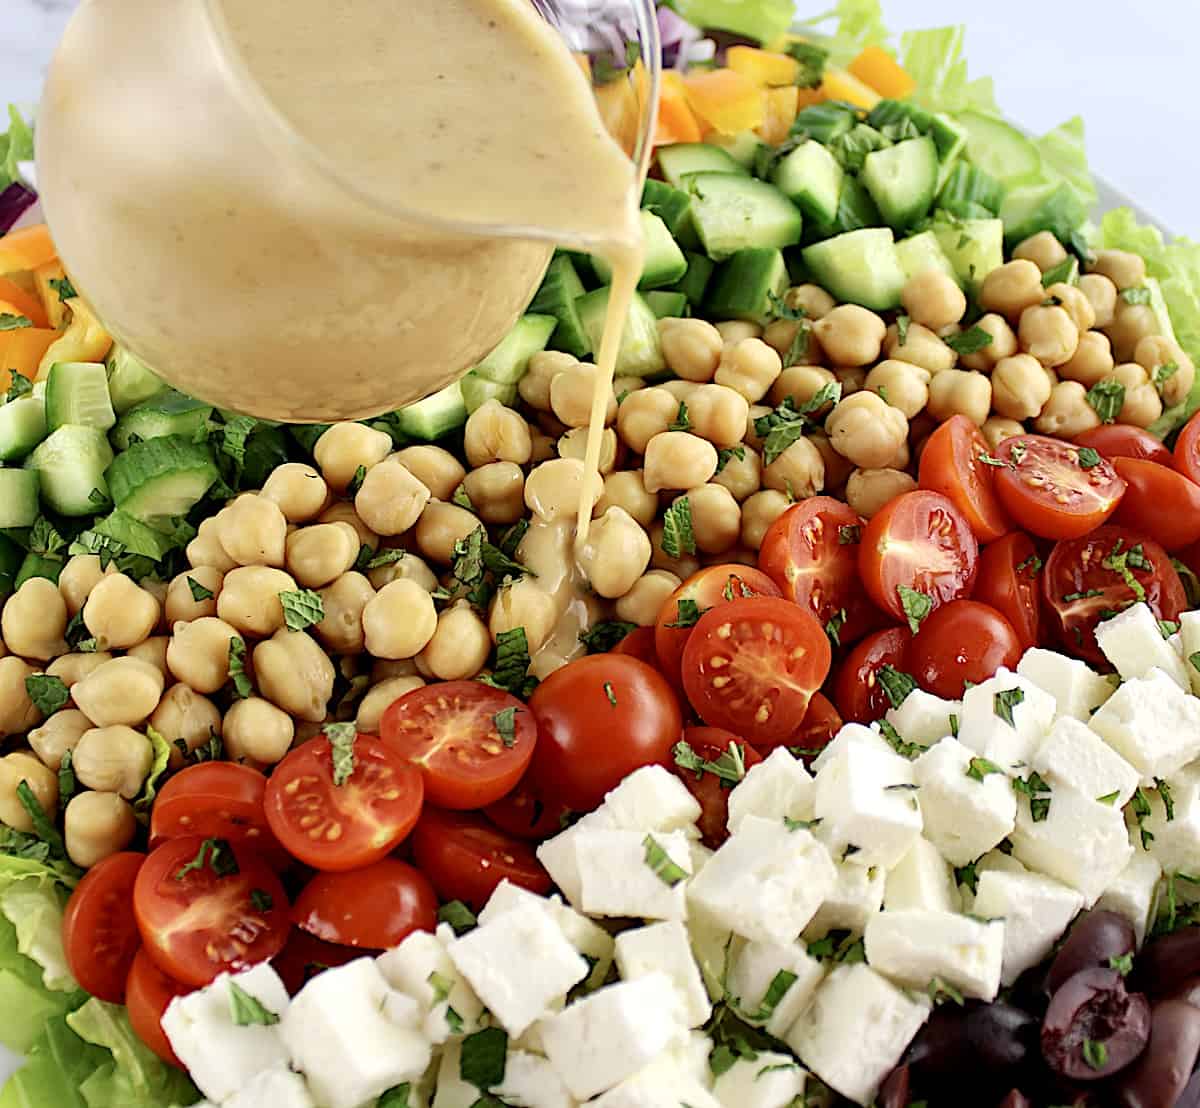 Mediterranean Chopped Salad with veggies arranged in row and dressing being poured over top